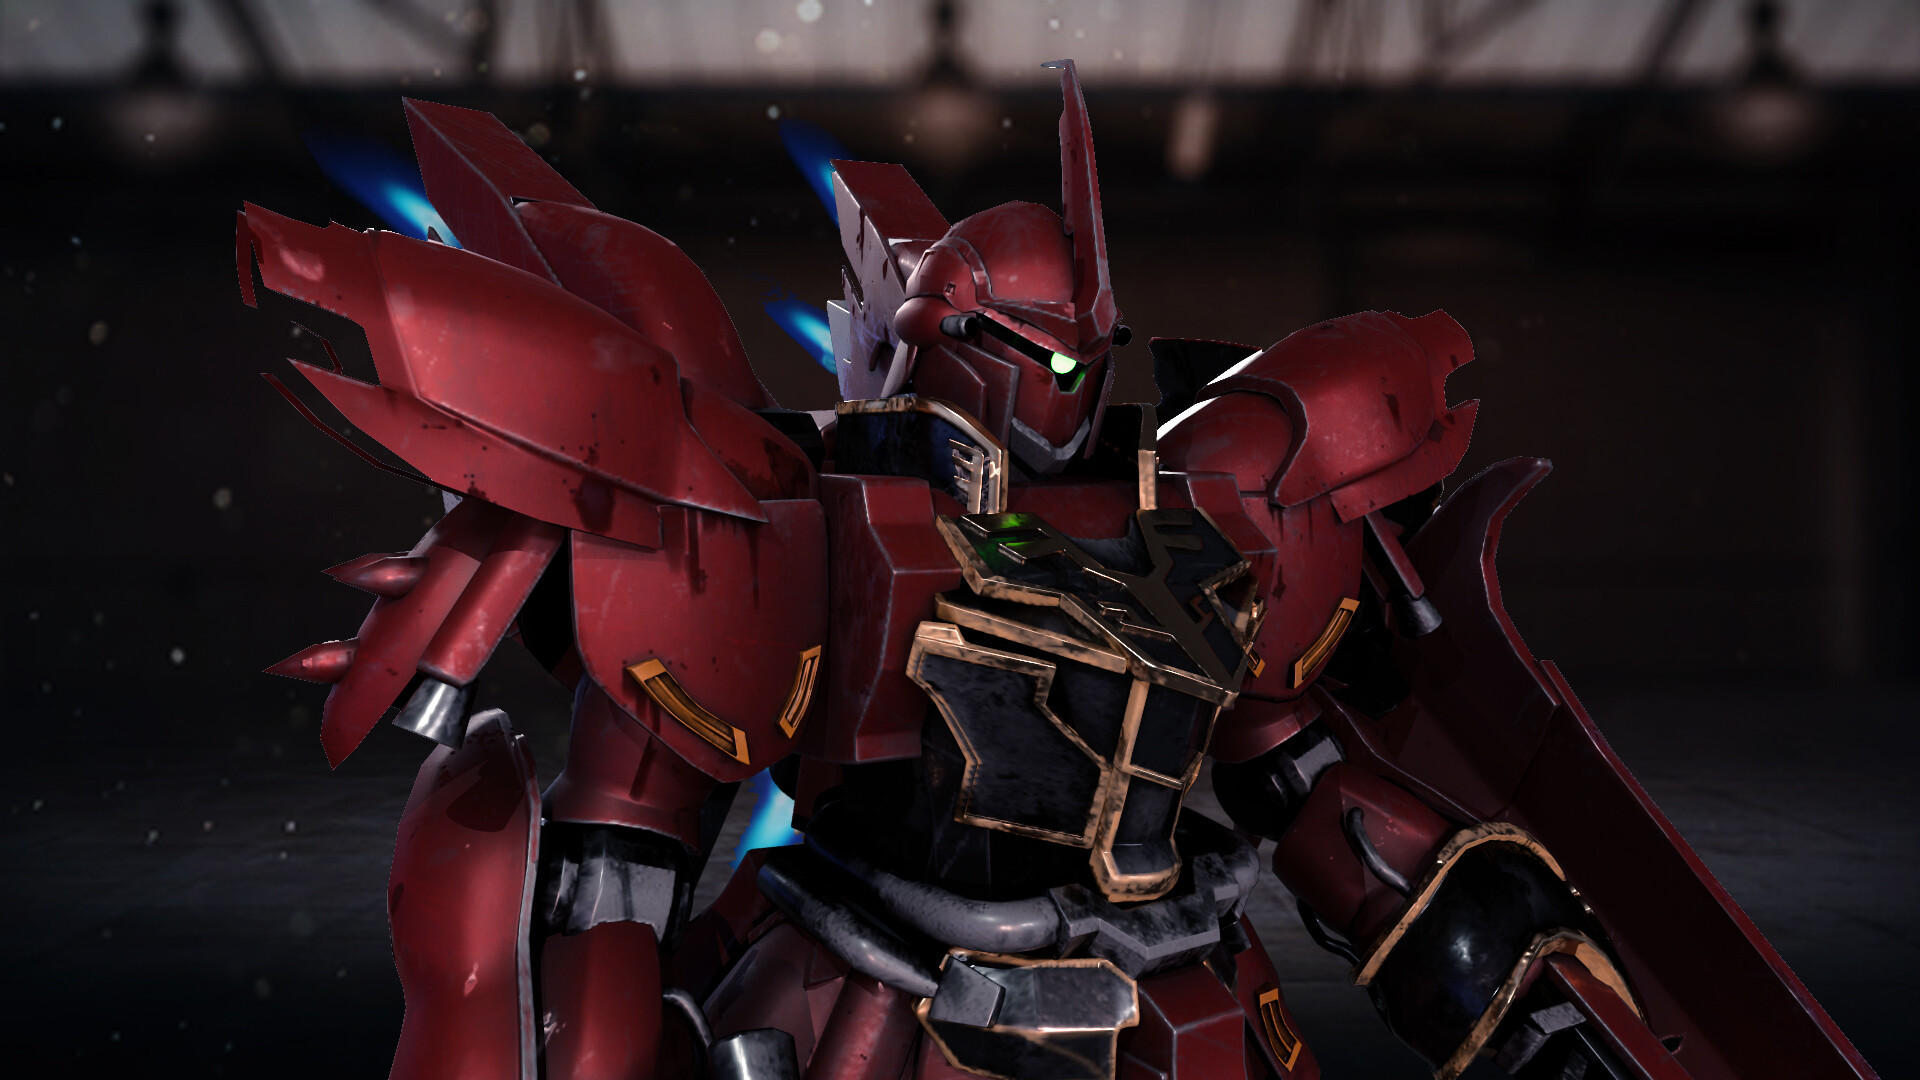 MG 1/100 Sinanju (Anime spec) （アニメ仕様）: Box Art & New Official Image,  reposted in Wallpaper Size. – GUNJAP